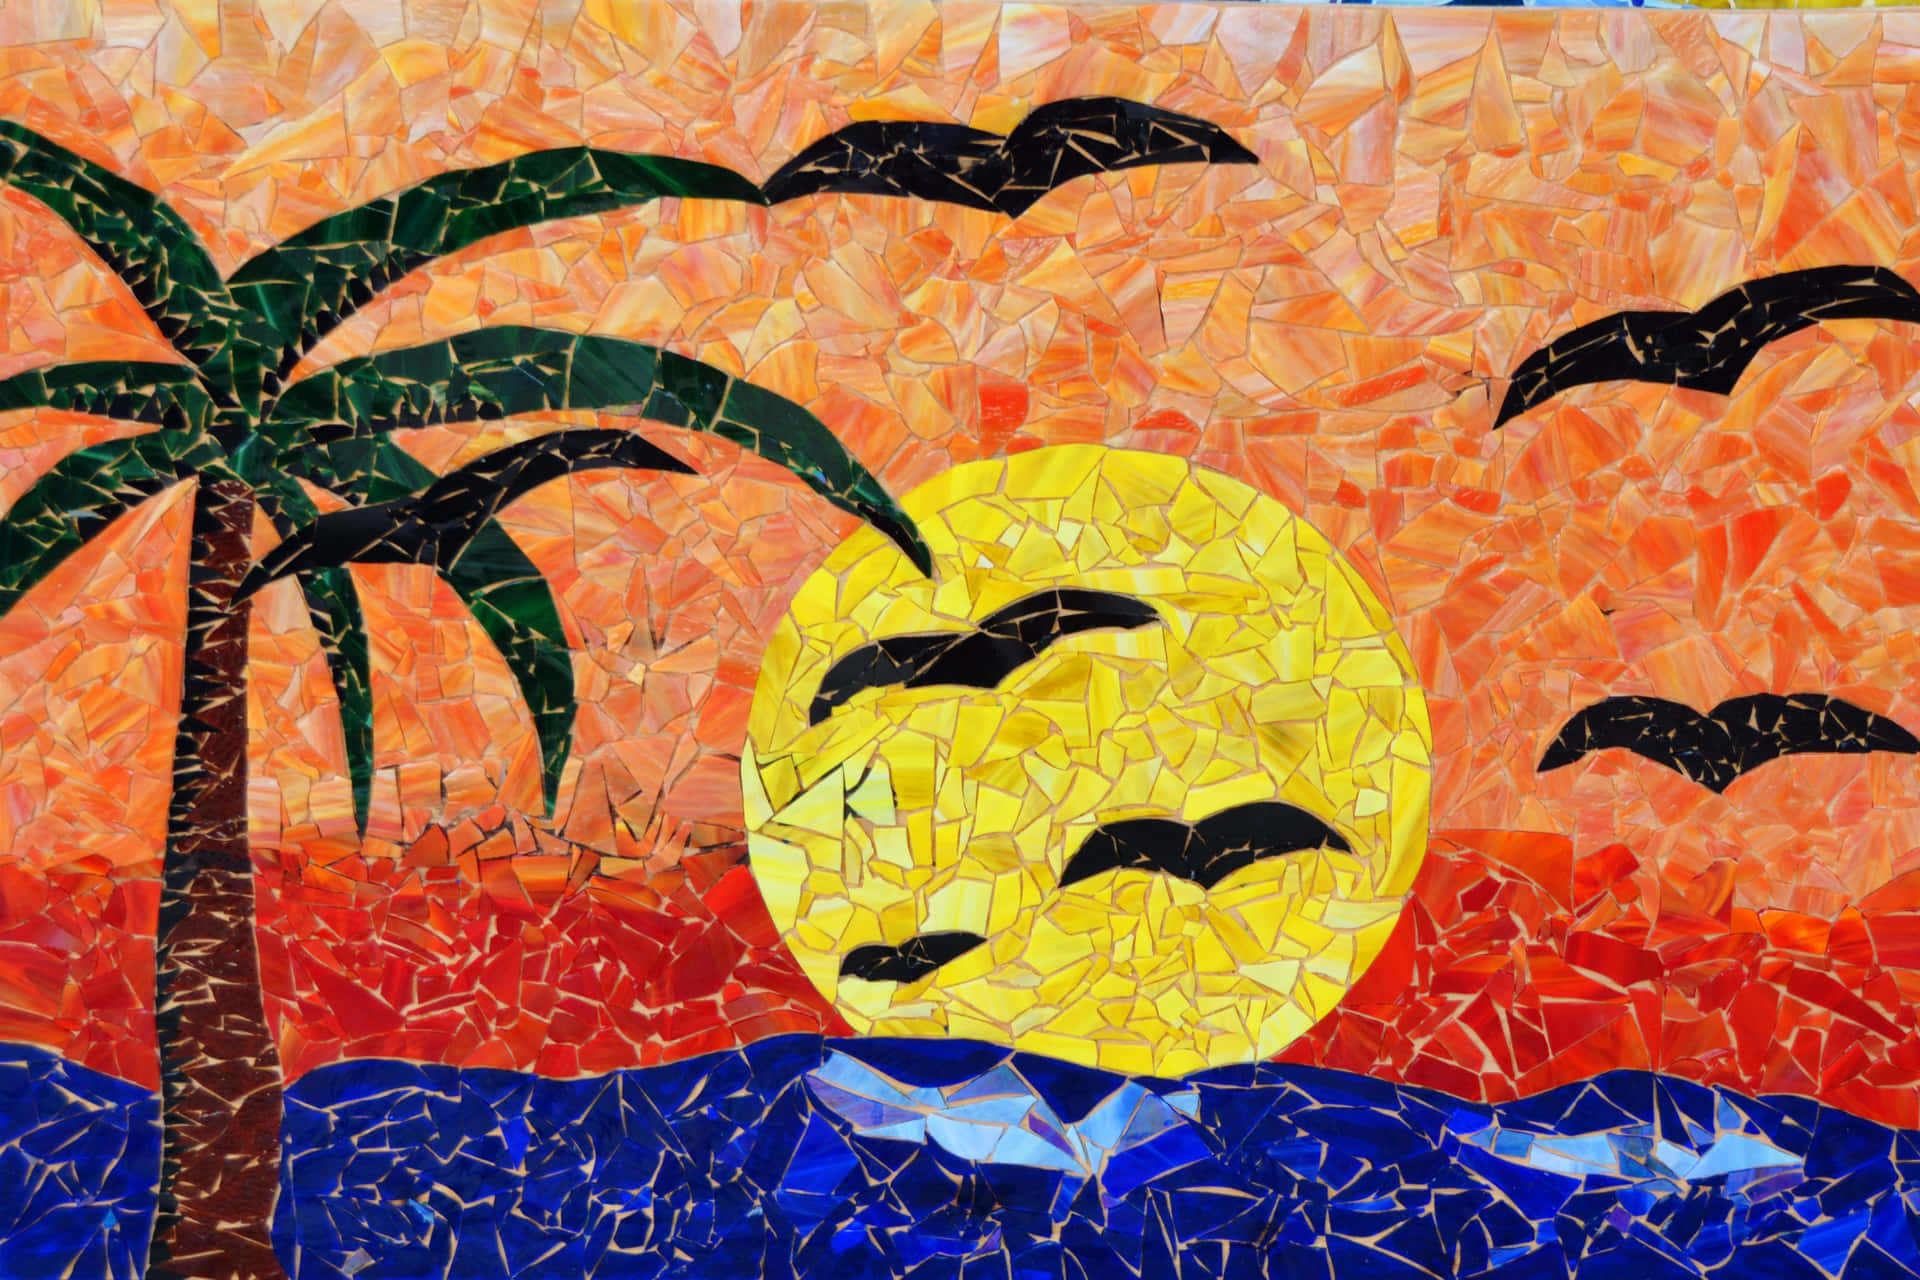 Mosaic Art - Sunset With Birds And Palm Trees